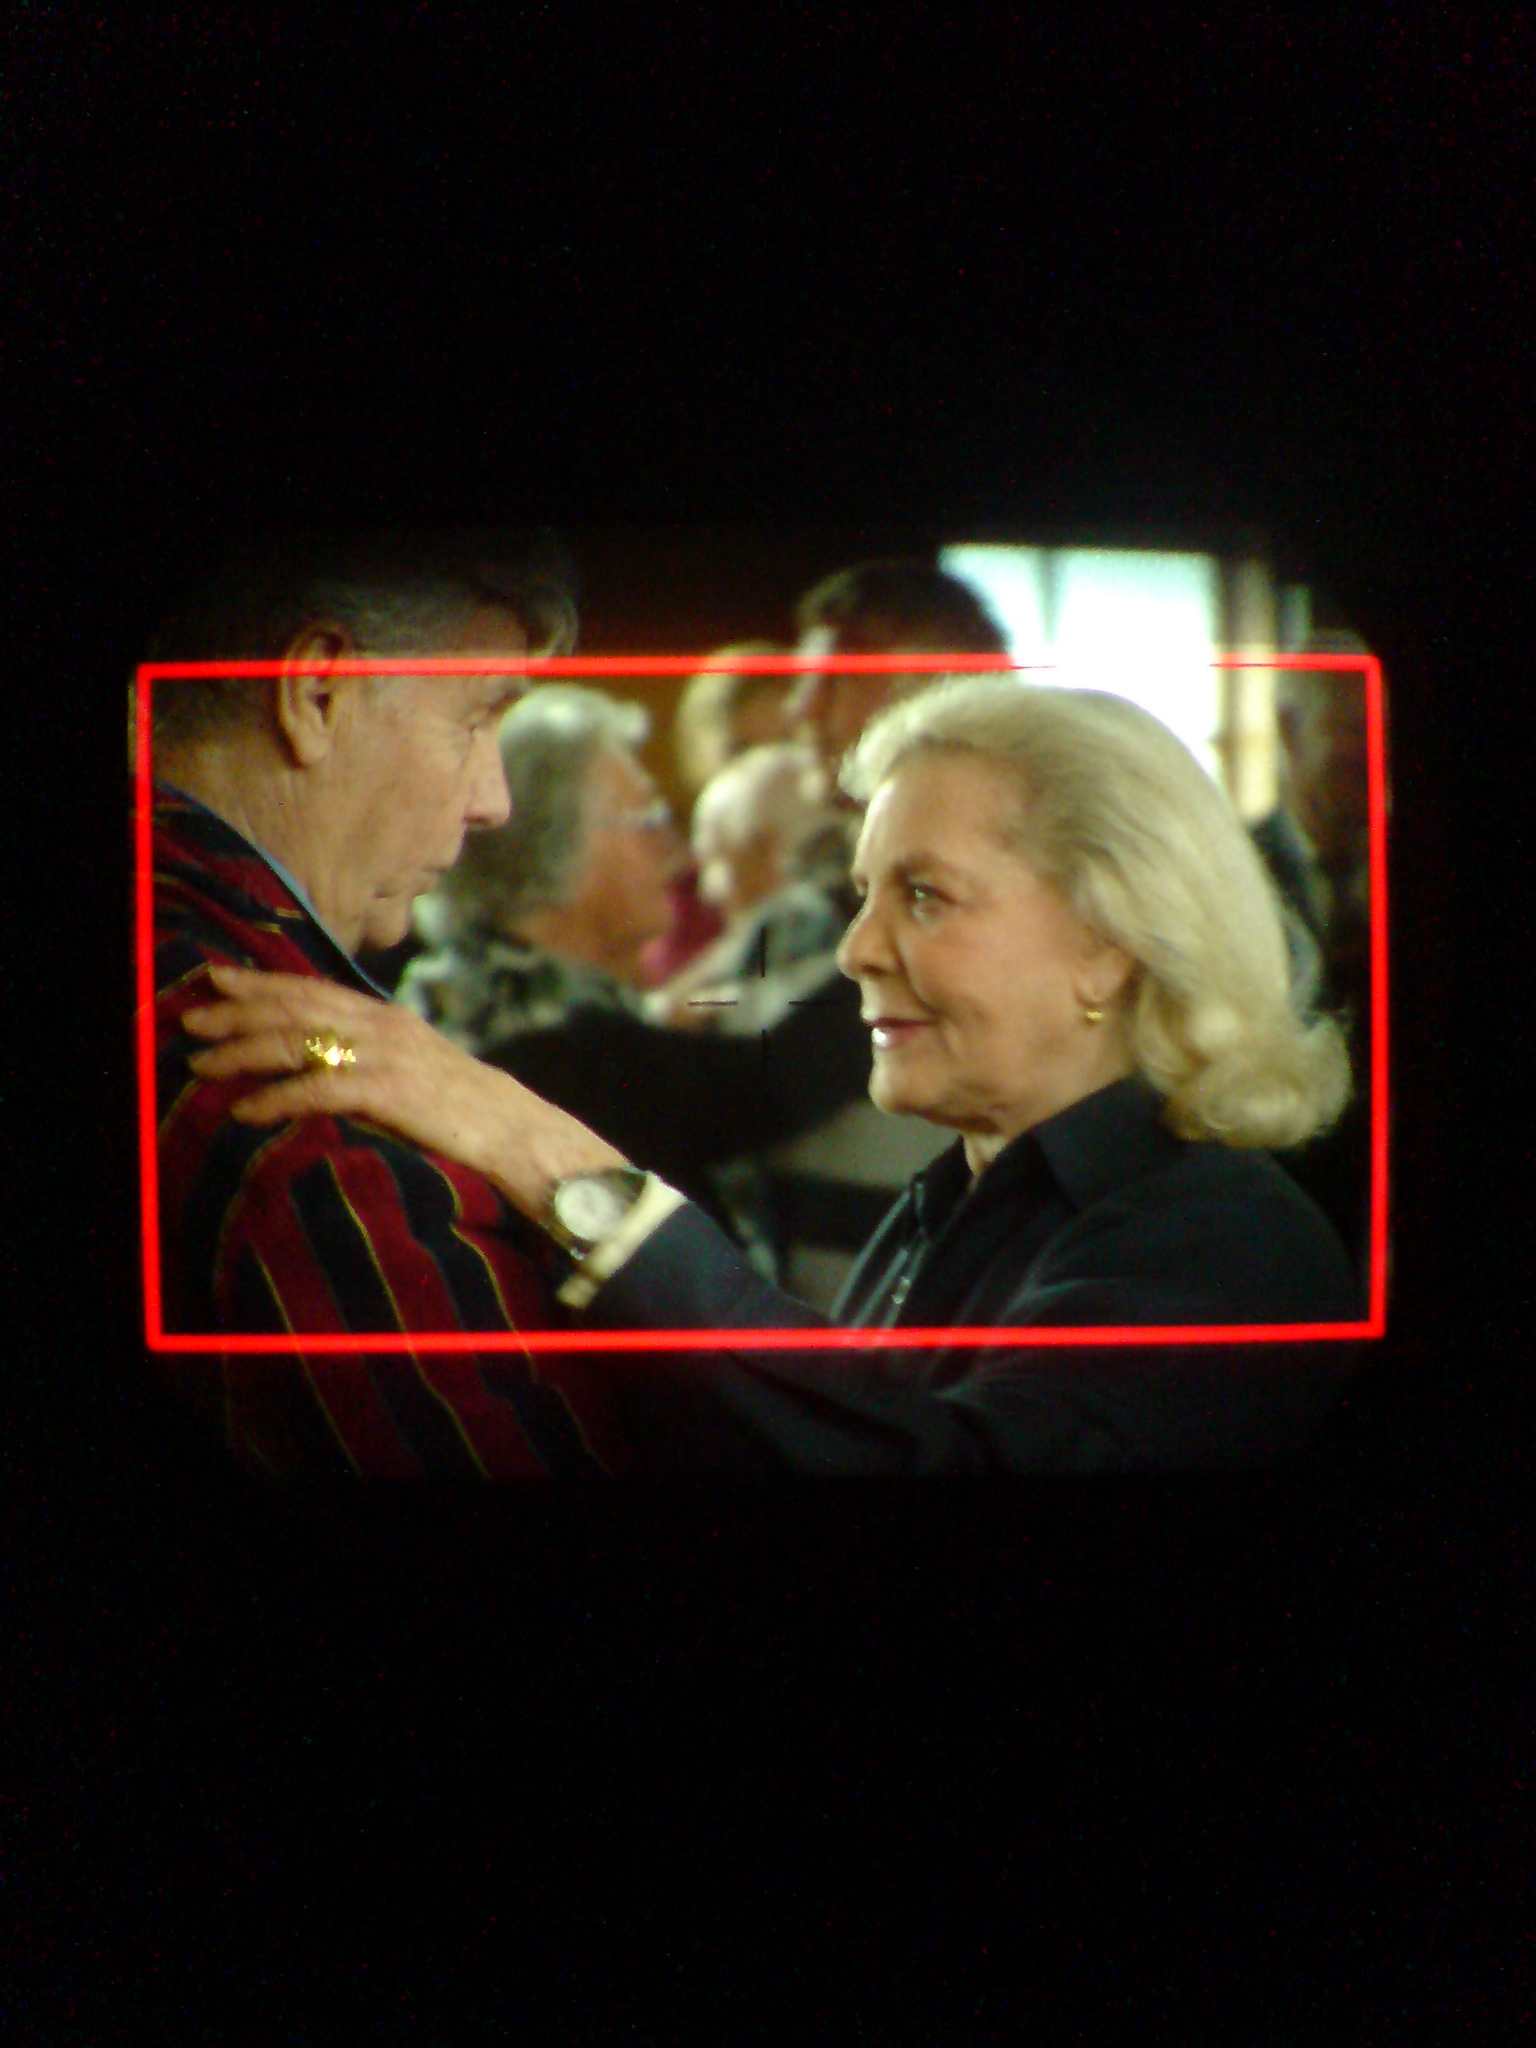 From Wide Blue Yonder. The late Ms. Lauren Bacall seen through the camera viewfinder.